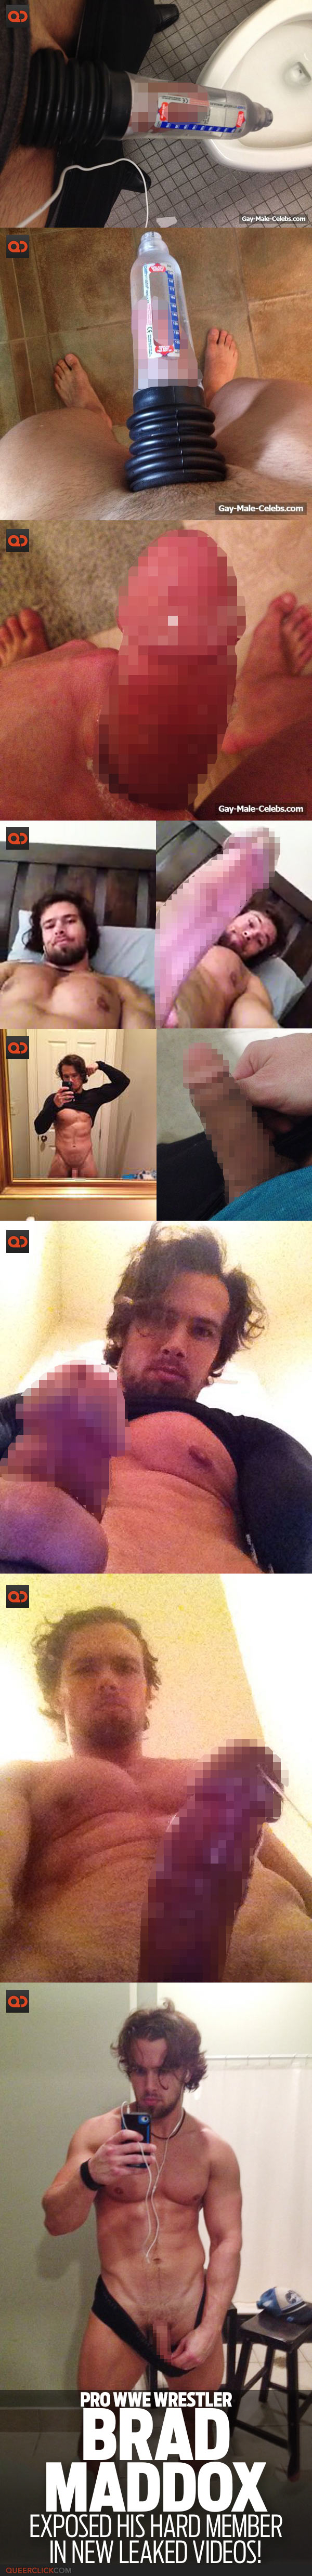 Brad Maddox, Pro WWE Wrestler, Exposed His Hard Member In New Leaked Videos!